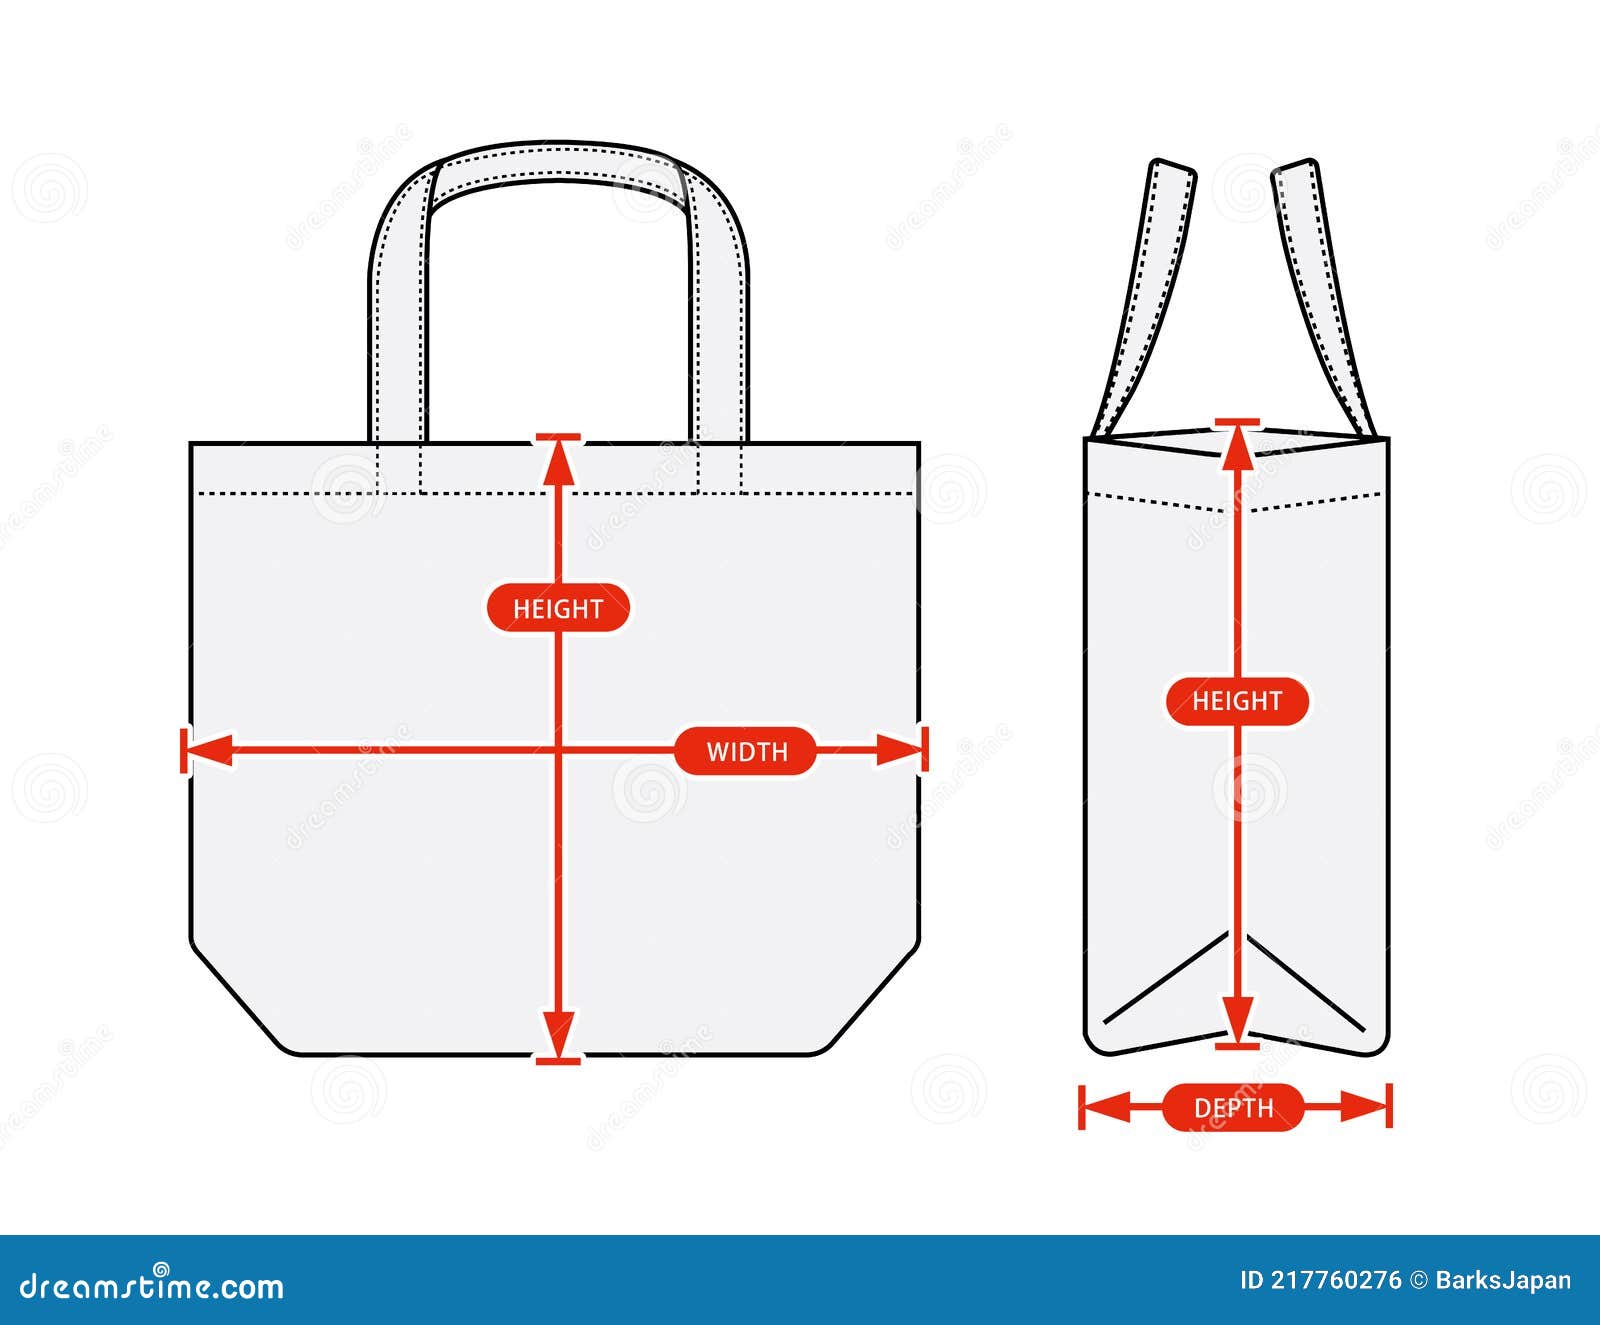 Tote Bag Size Chart AOP Tote Size Chart Sizing Chart for -  UK